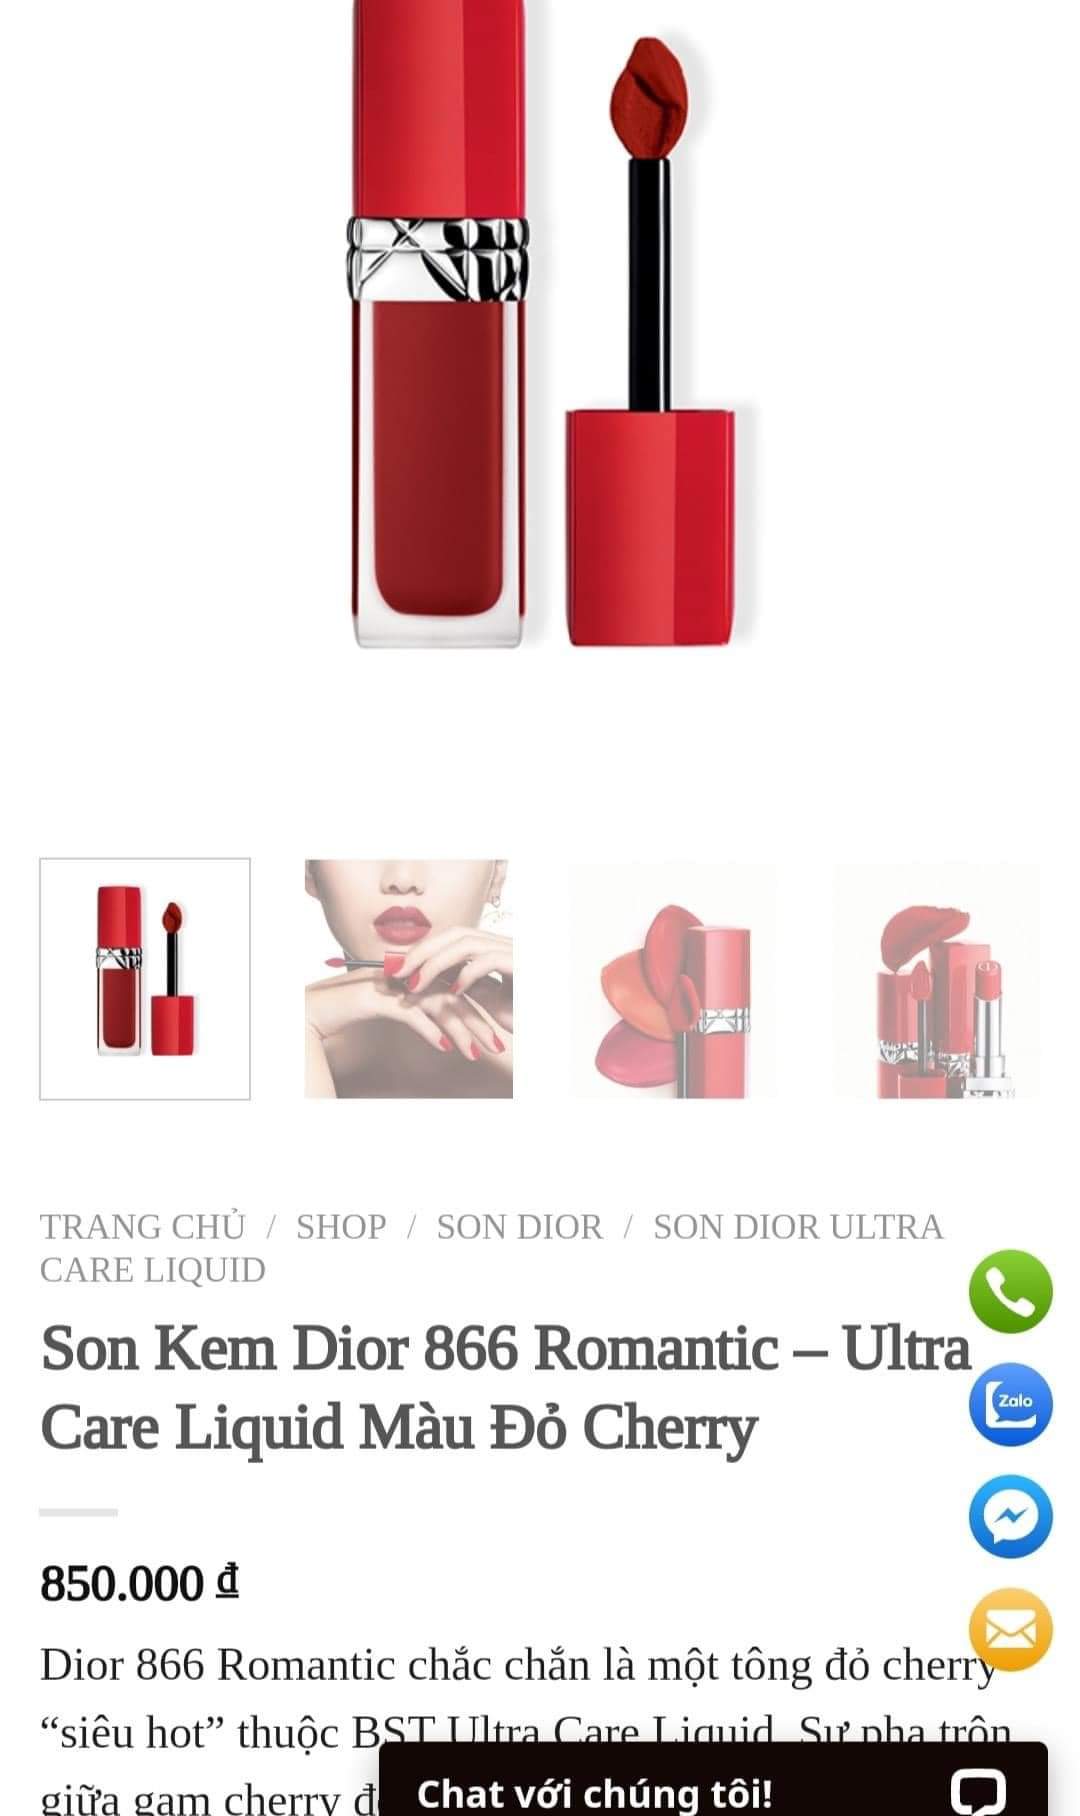 Dior Rouge Dior Forever Liquid TransferProof Lipstick  760 Forever Glam A  transferproof matte liquid lip color that is ultrapigmented  Instagram